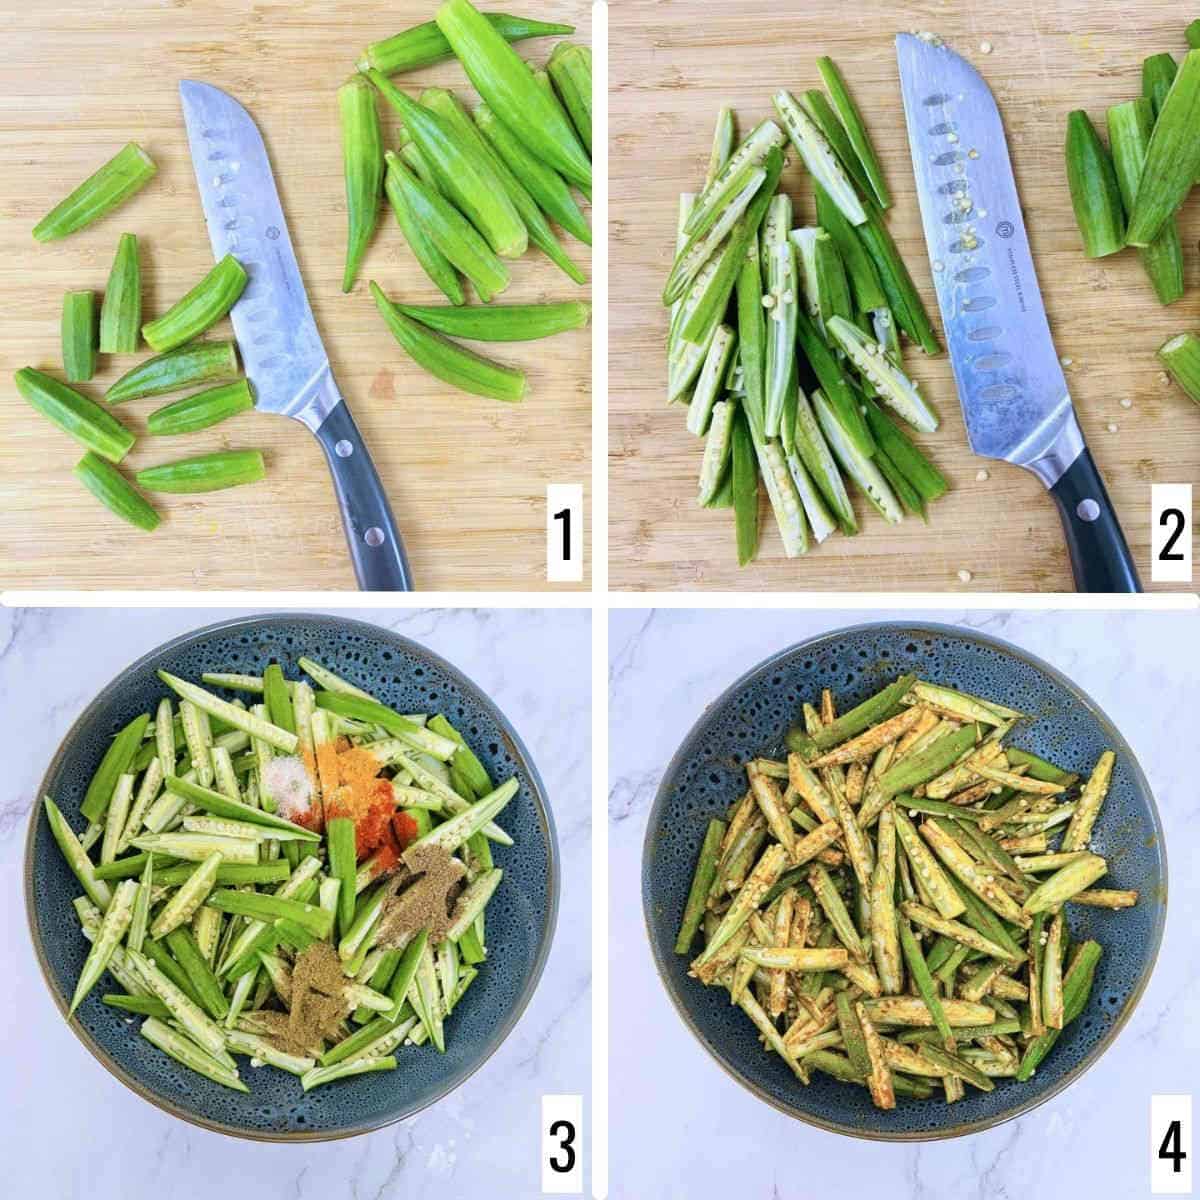 A 4-step collage showing the cutting and seasoning of bhindi.